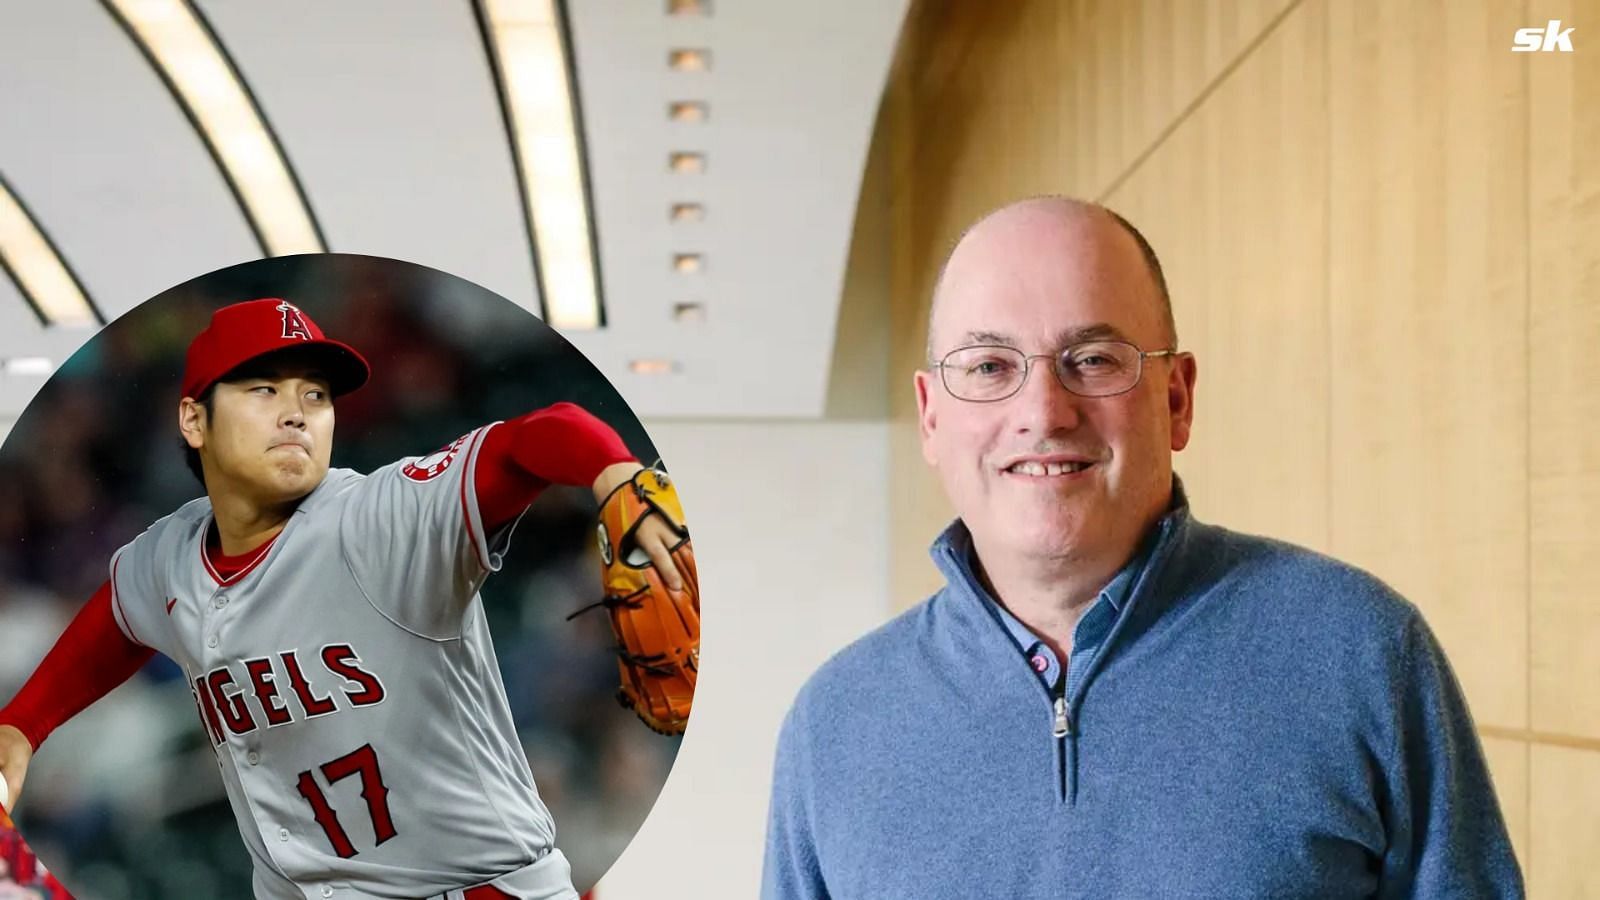 Steve Cohen has his eyes set on the World Series, with Shohei Ohtani tumors looming